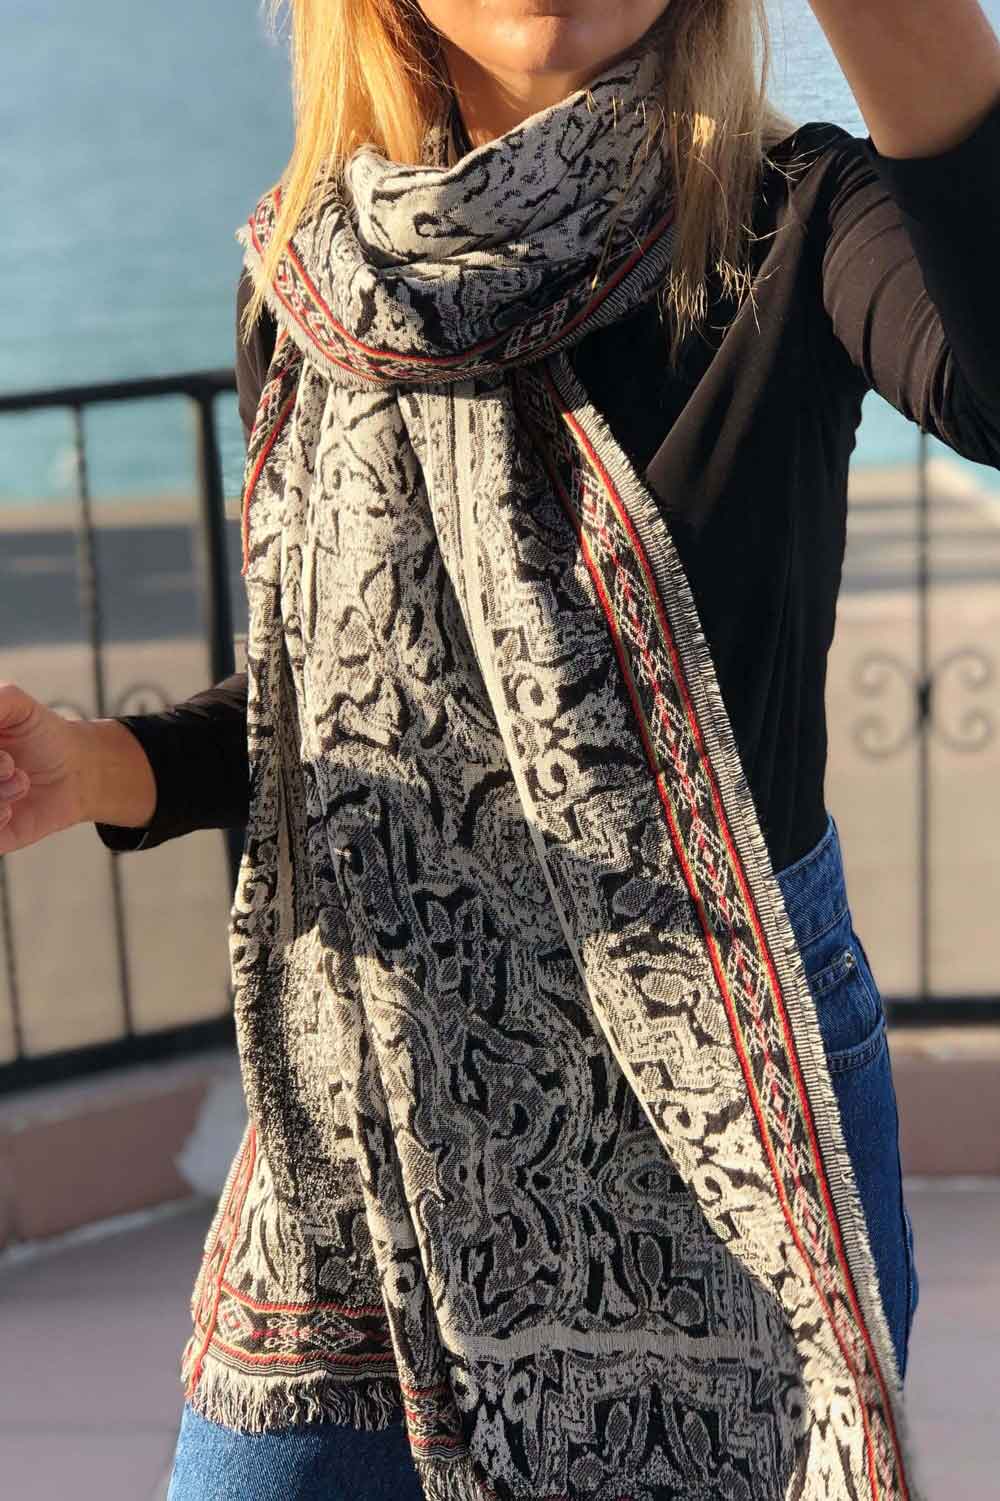 Looking for a warm scarf to keep you cozy all winter? Look no further than Moyoni Design's collection of 100% cotton scarves. With a range of unique prints, colors, and designs, we have something for everyone. Whether you're in the mood for a classic rectangle scarf or something with a bit of flair, we've got you covered. Made from high-quality cotton, these scarves are sure to keep you warm and stylish at the same time. Add one to your wardrobe today!